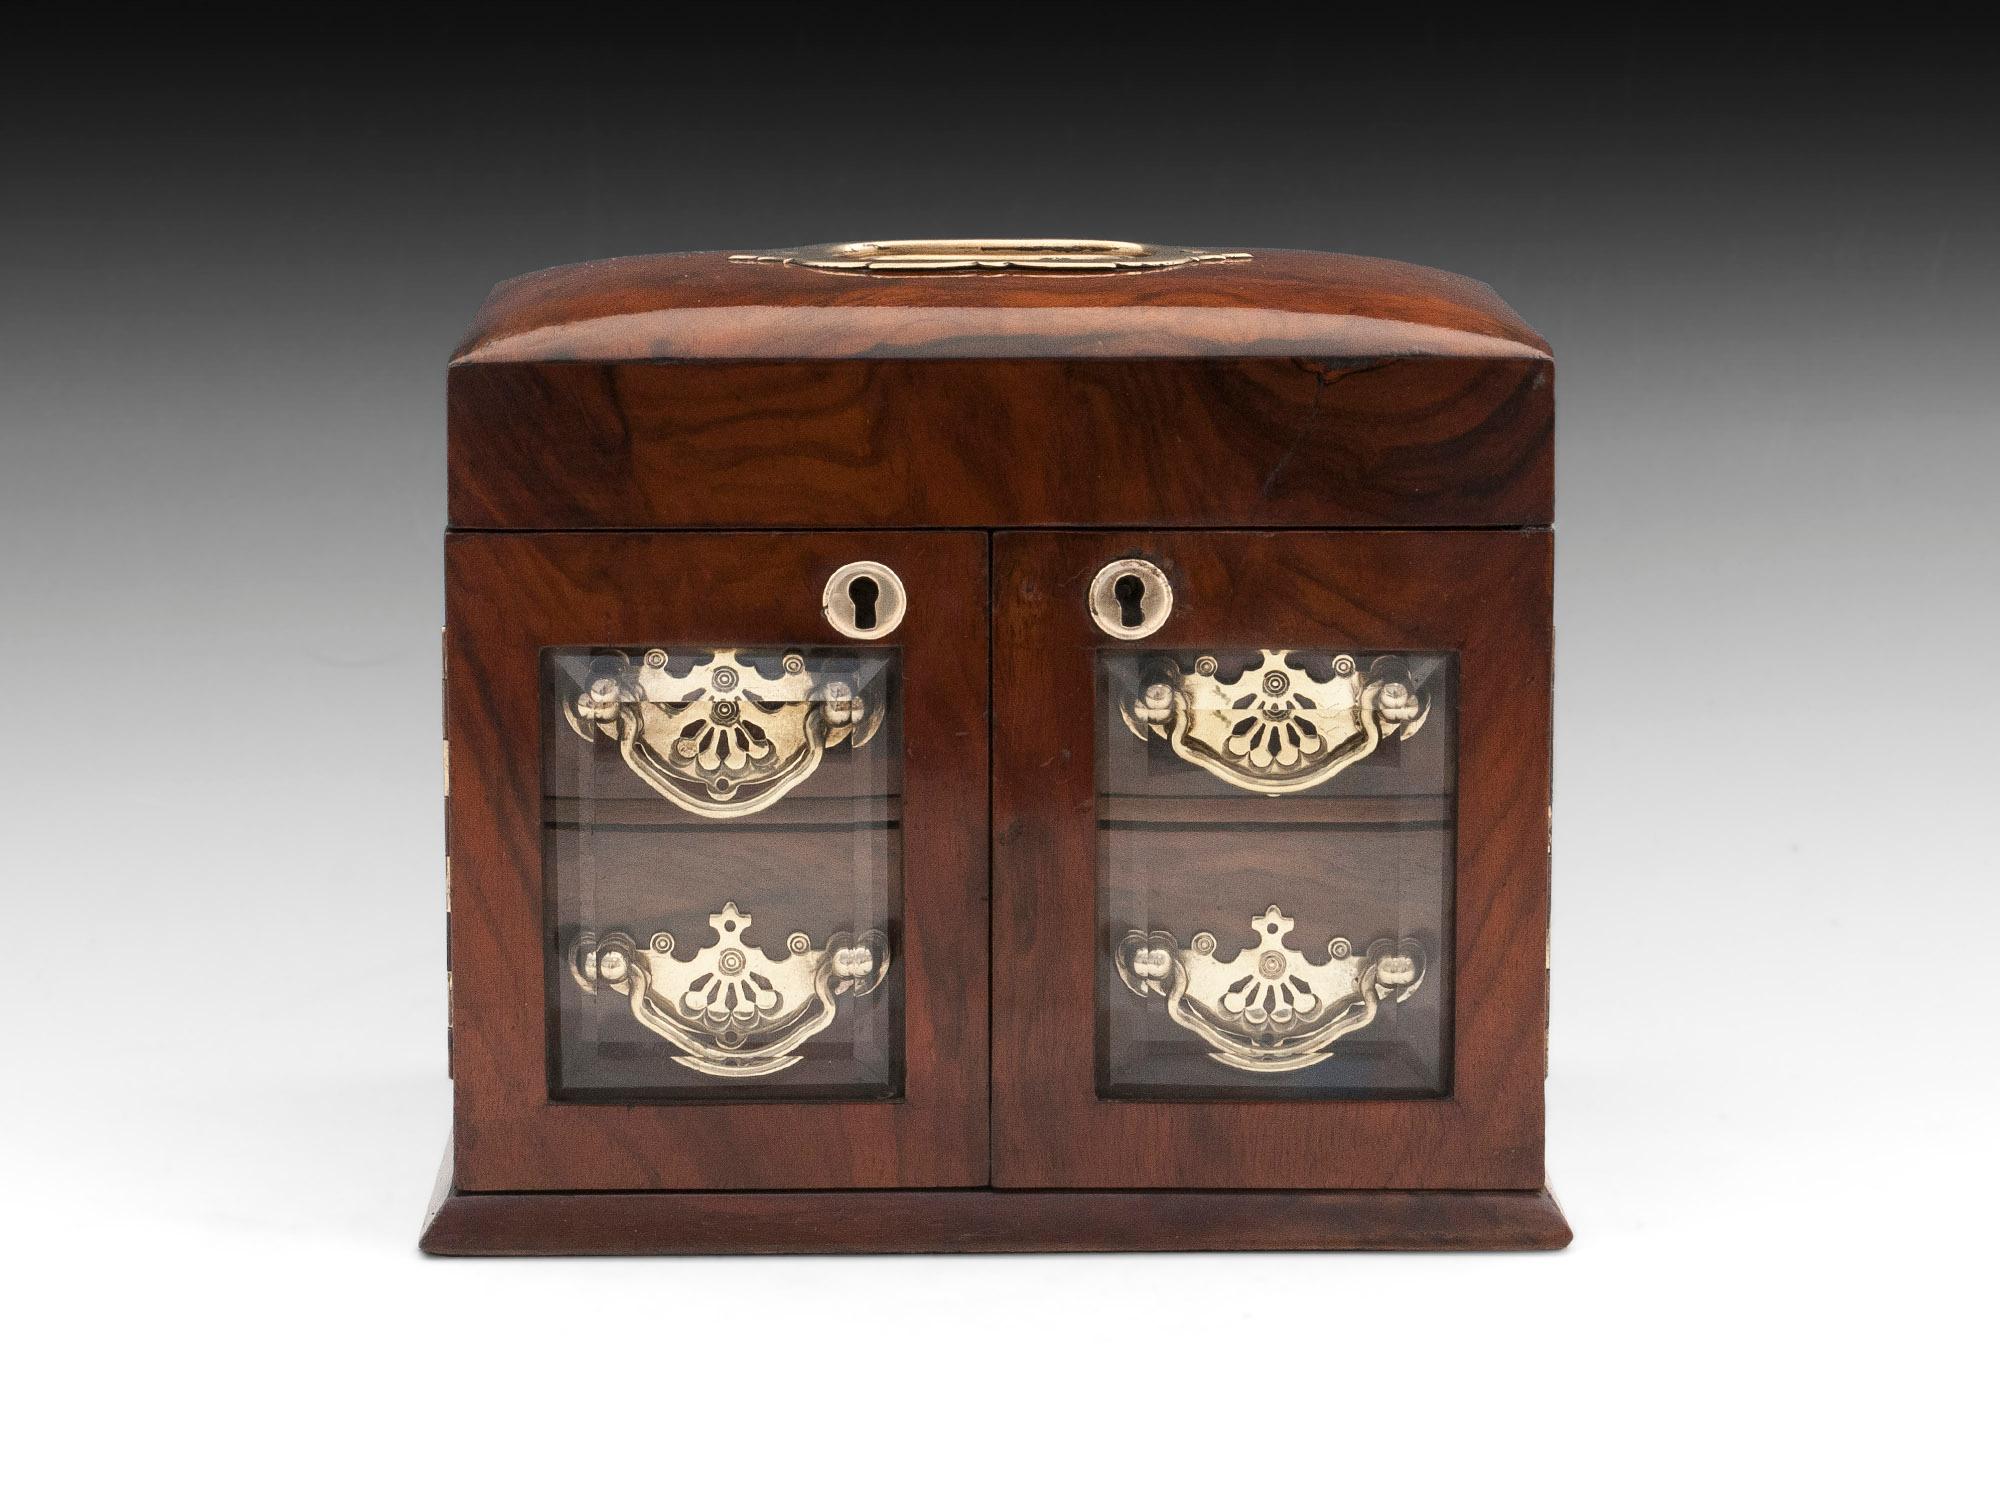 Antique walnut jewelry cabinet with brass carry handle and beveled glass doors to the front.
Once unlocked the lid can be lifted to reveal three padded jewelry compartments, including two that can be used for rings, earrings or cufflinks. 

With